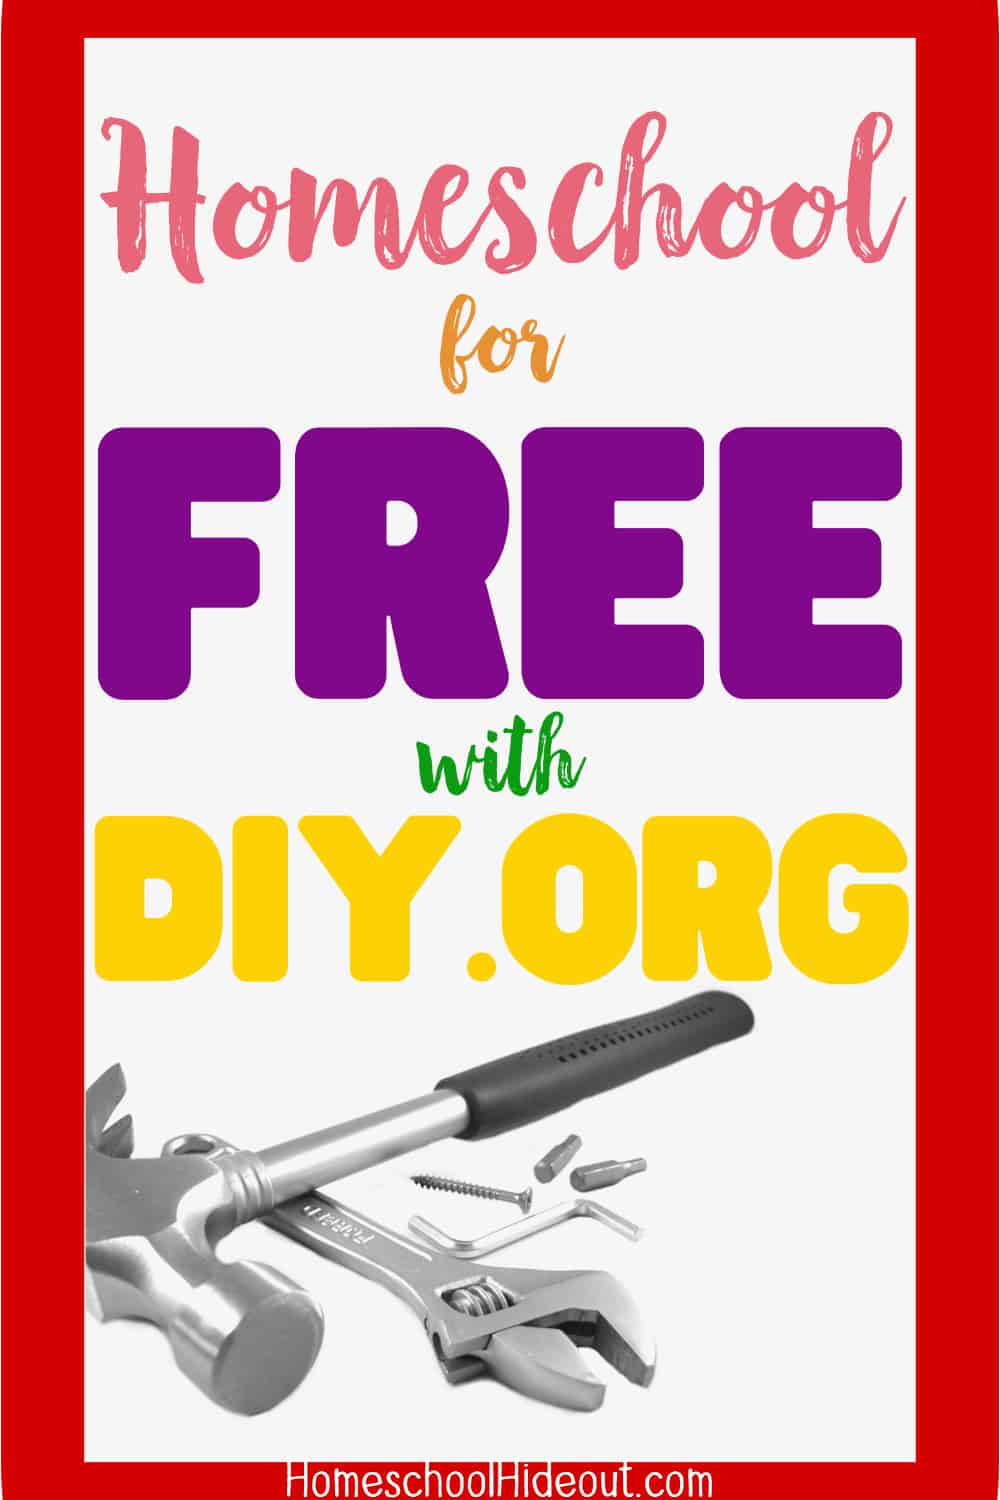 My absolute favorite site on the net! You can even homeschool for FREE using DIY.org!